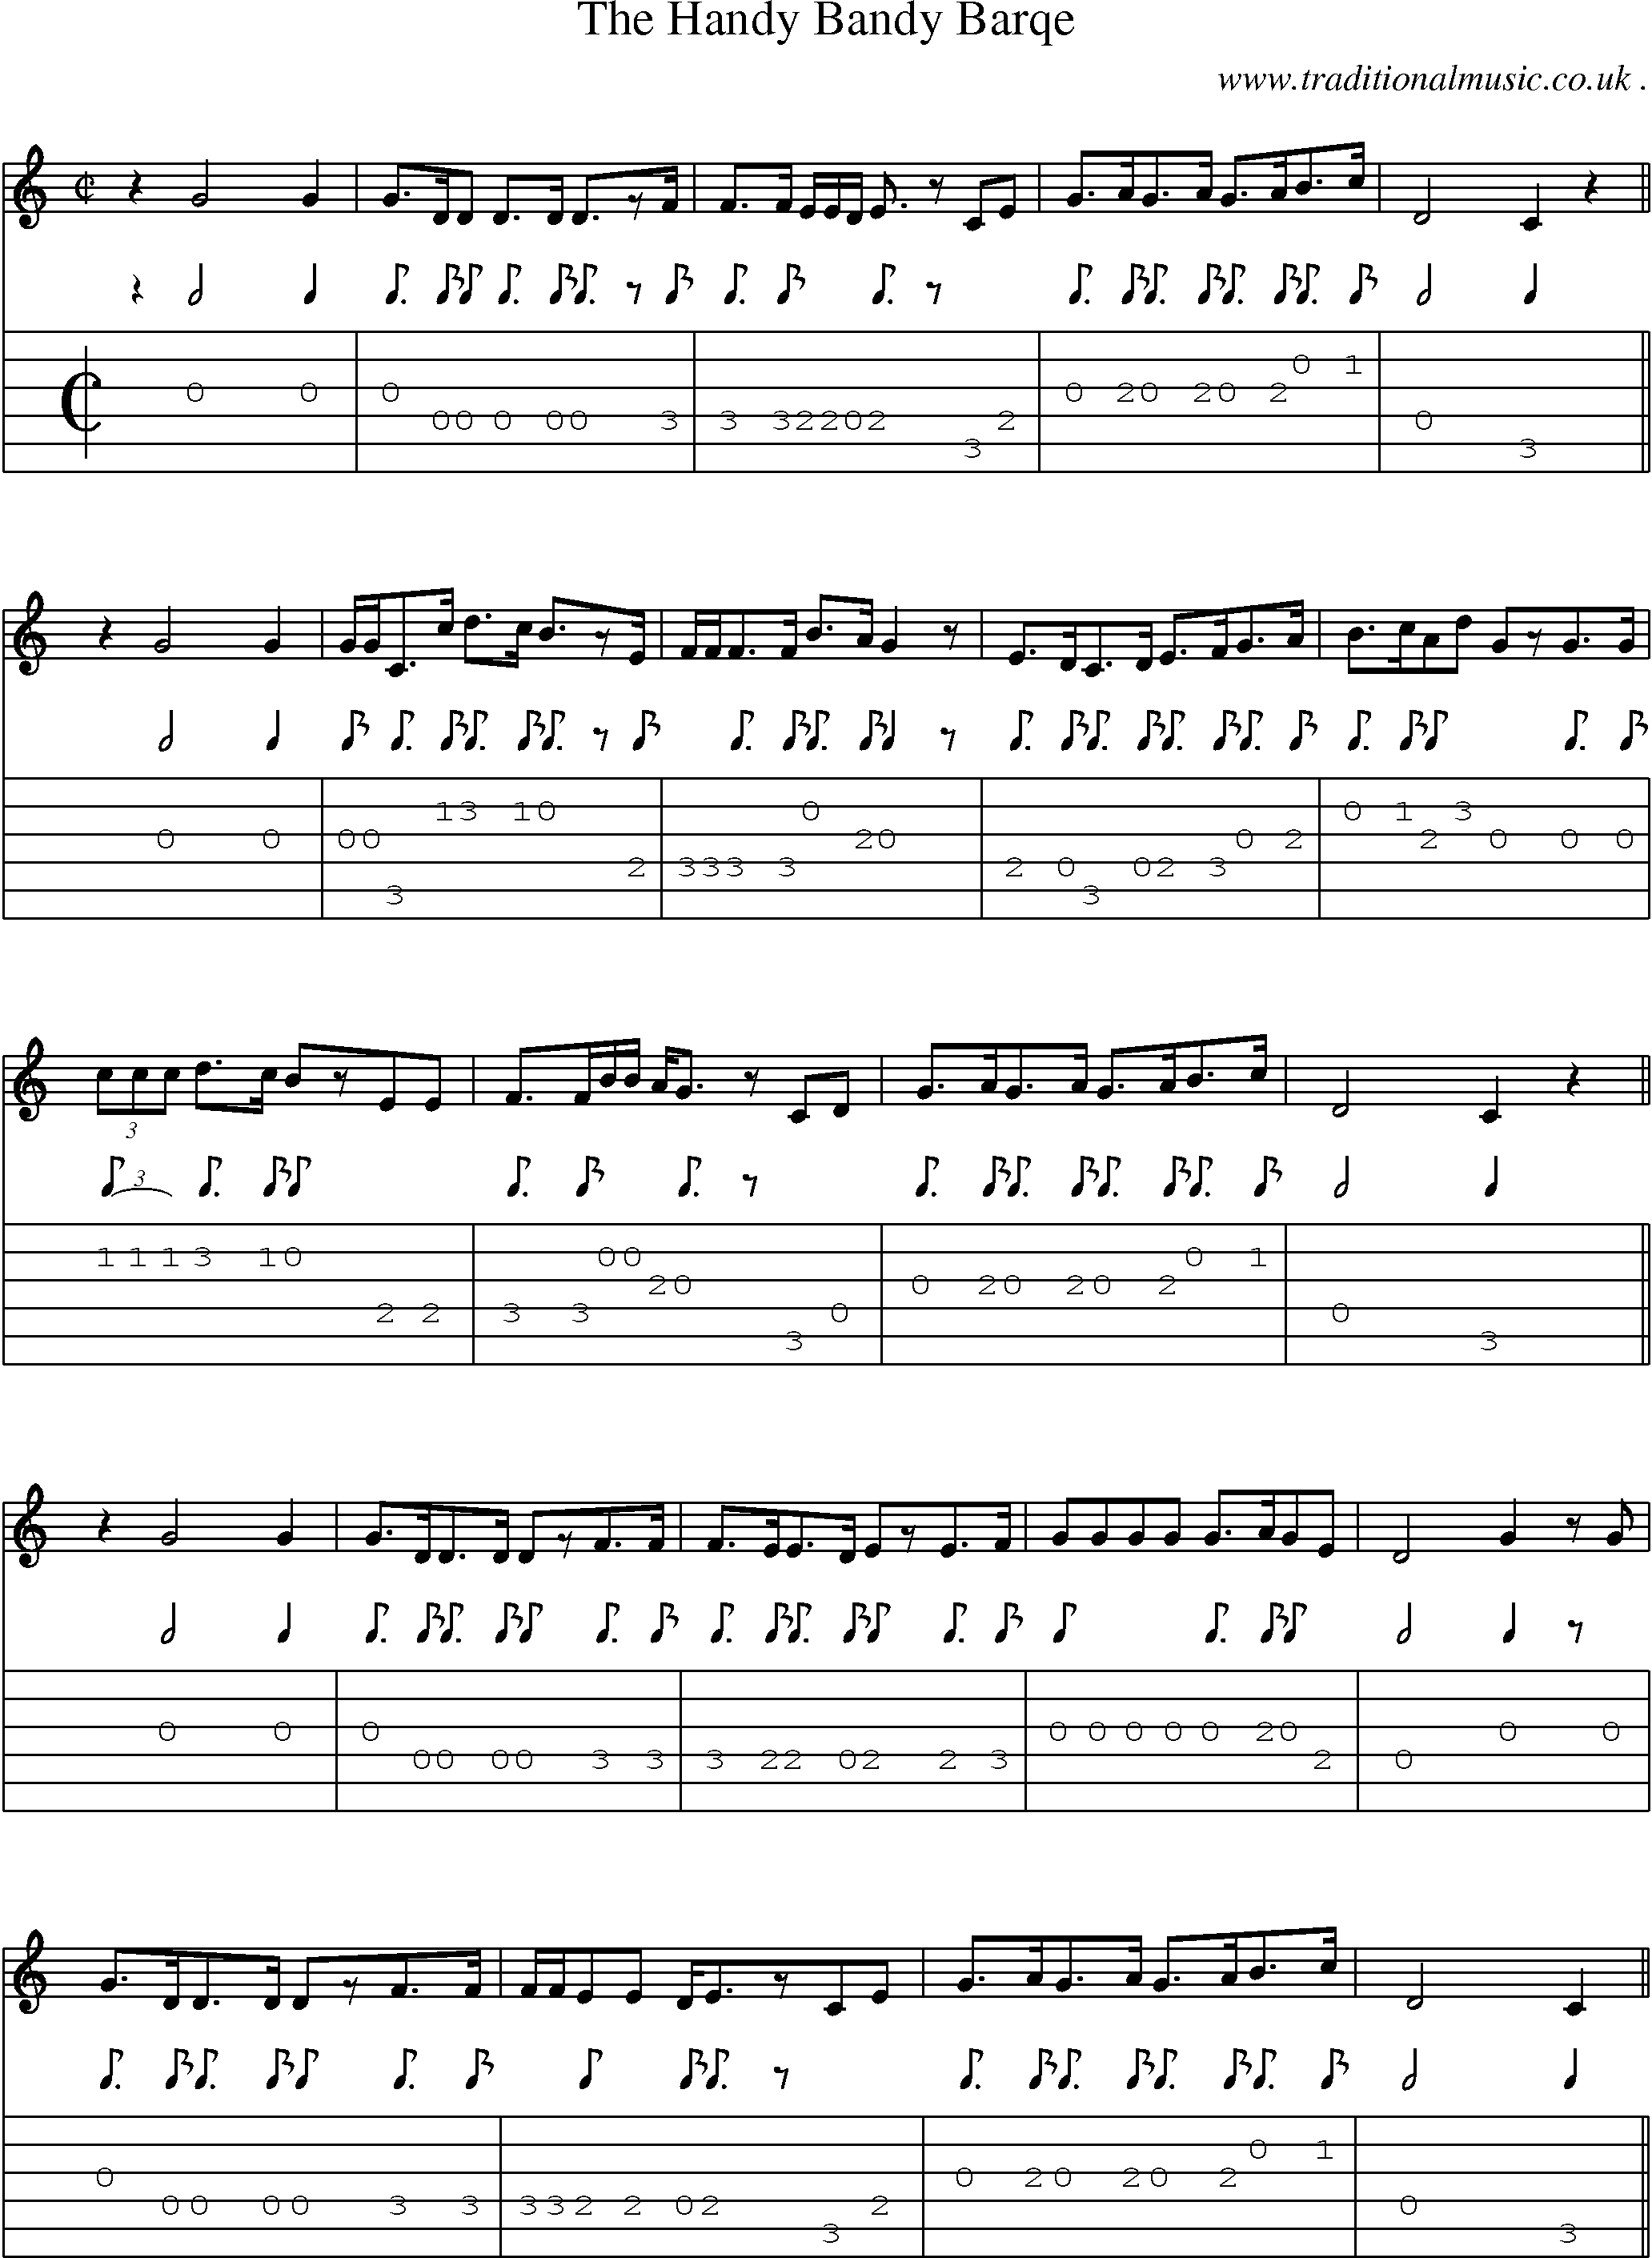 Sheet-Music and Guitar Tabs for The Handy Bandy Barqe